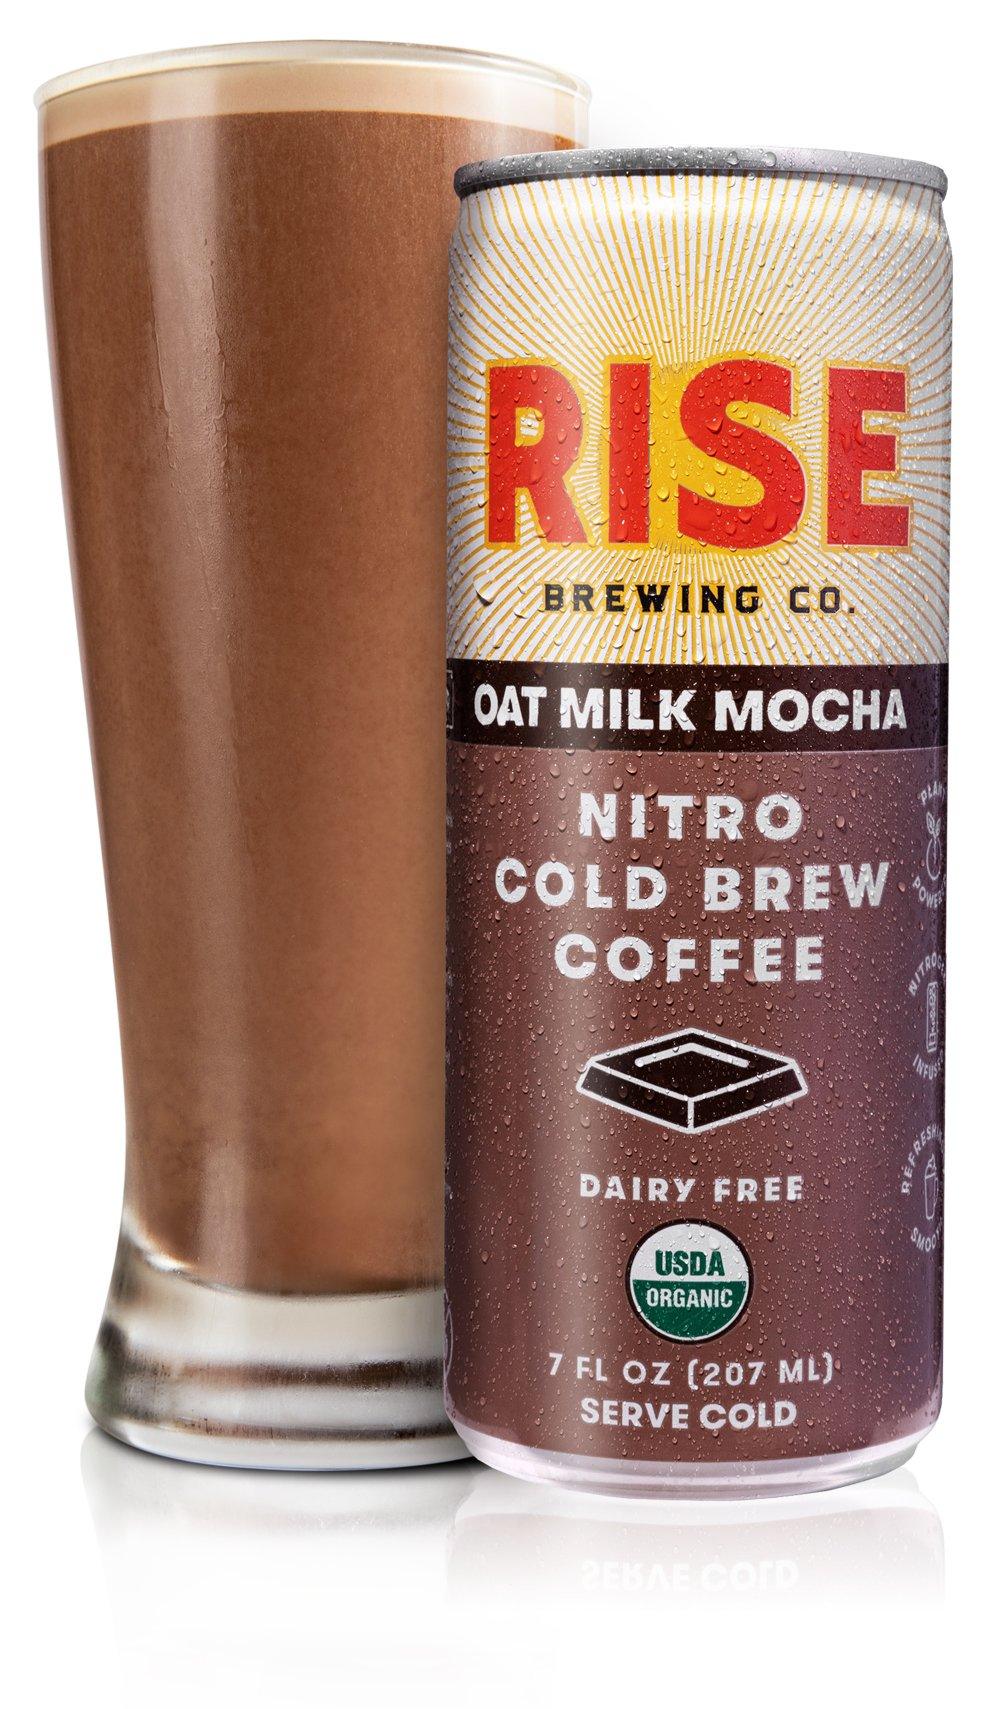 RISE Brewing Co. Nitro Cold Brew Coffee, Mocha Latte, 7 fl. oz. Cans (Pack of 12) - Oasis Snacks